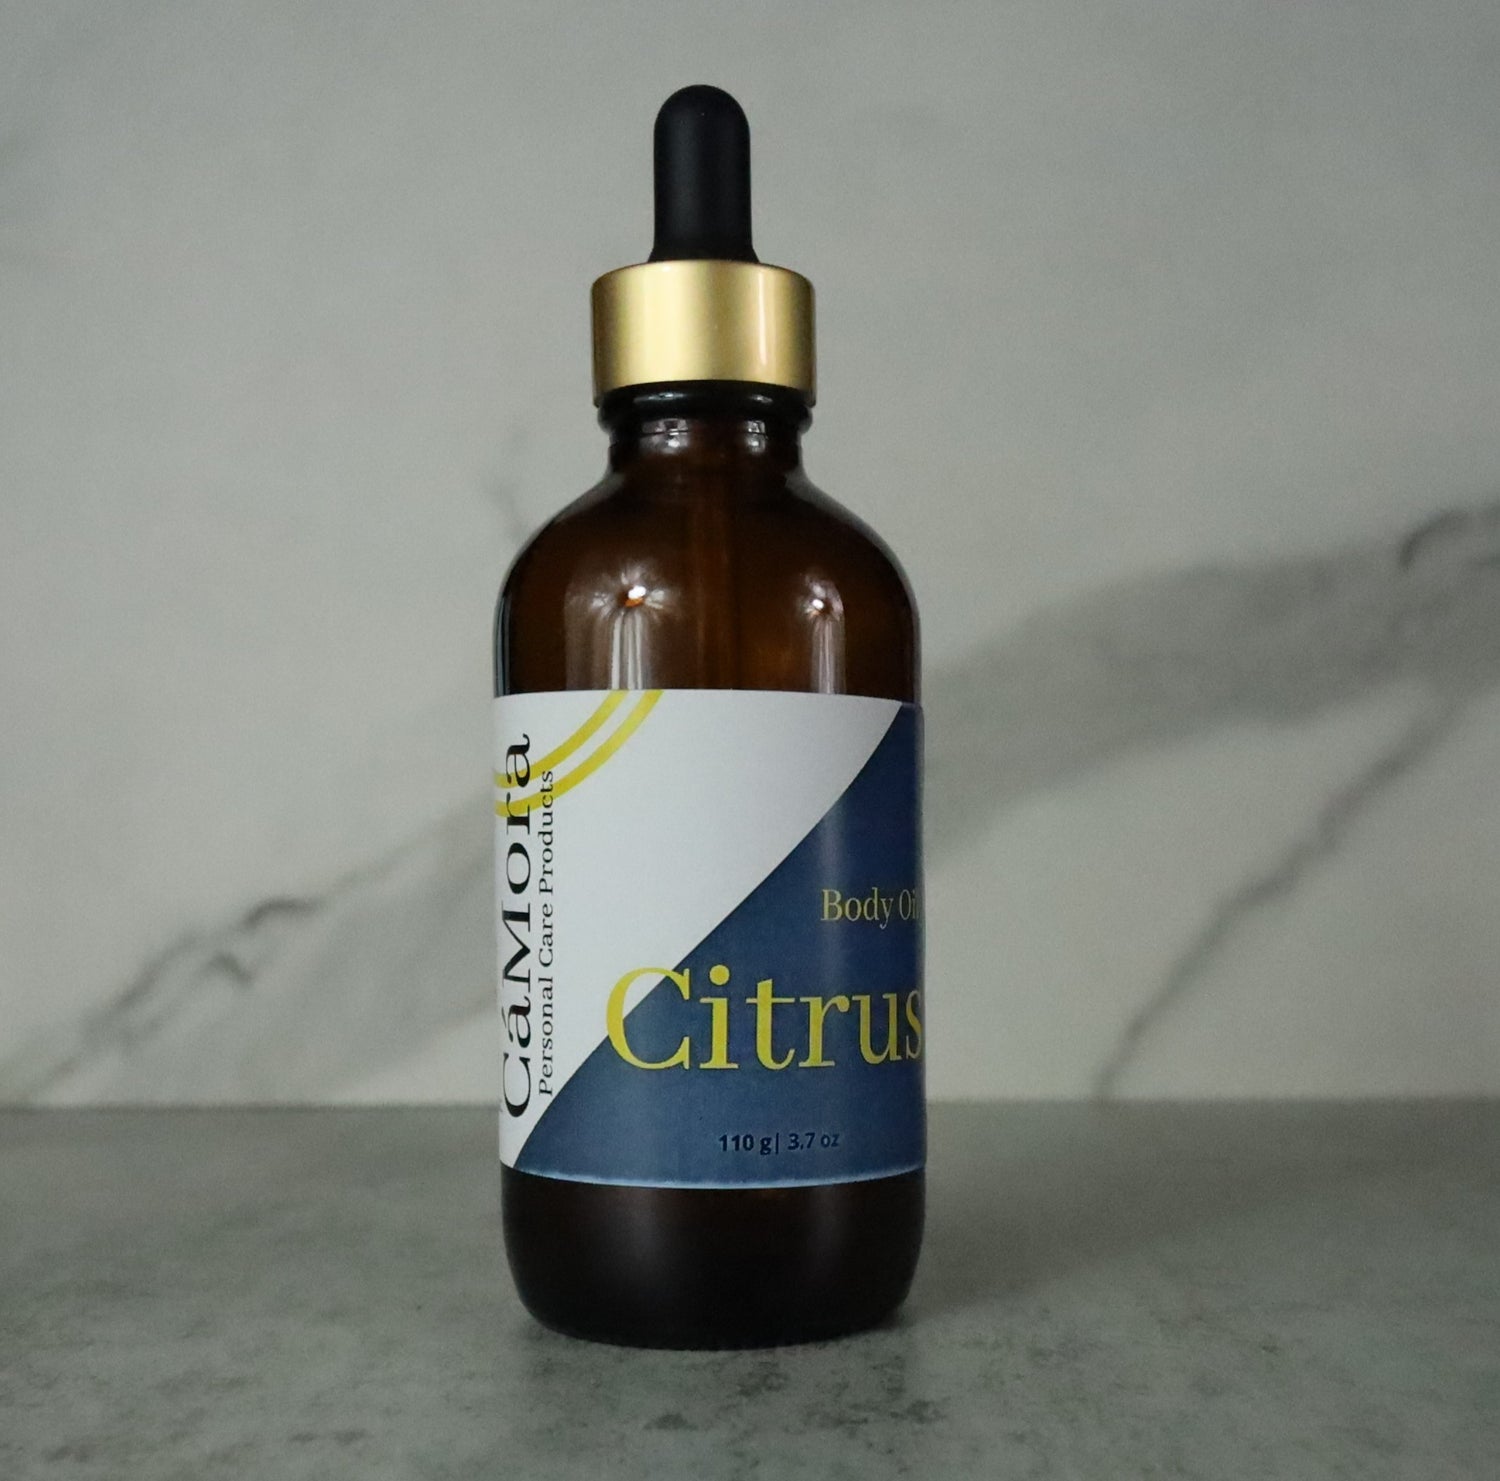 Organic citrus body oil.  4 ounces.  Infused with a proprietary blend of citrus essential oils.